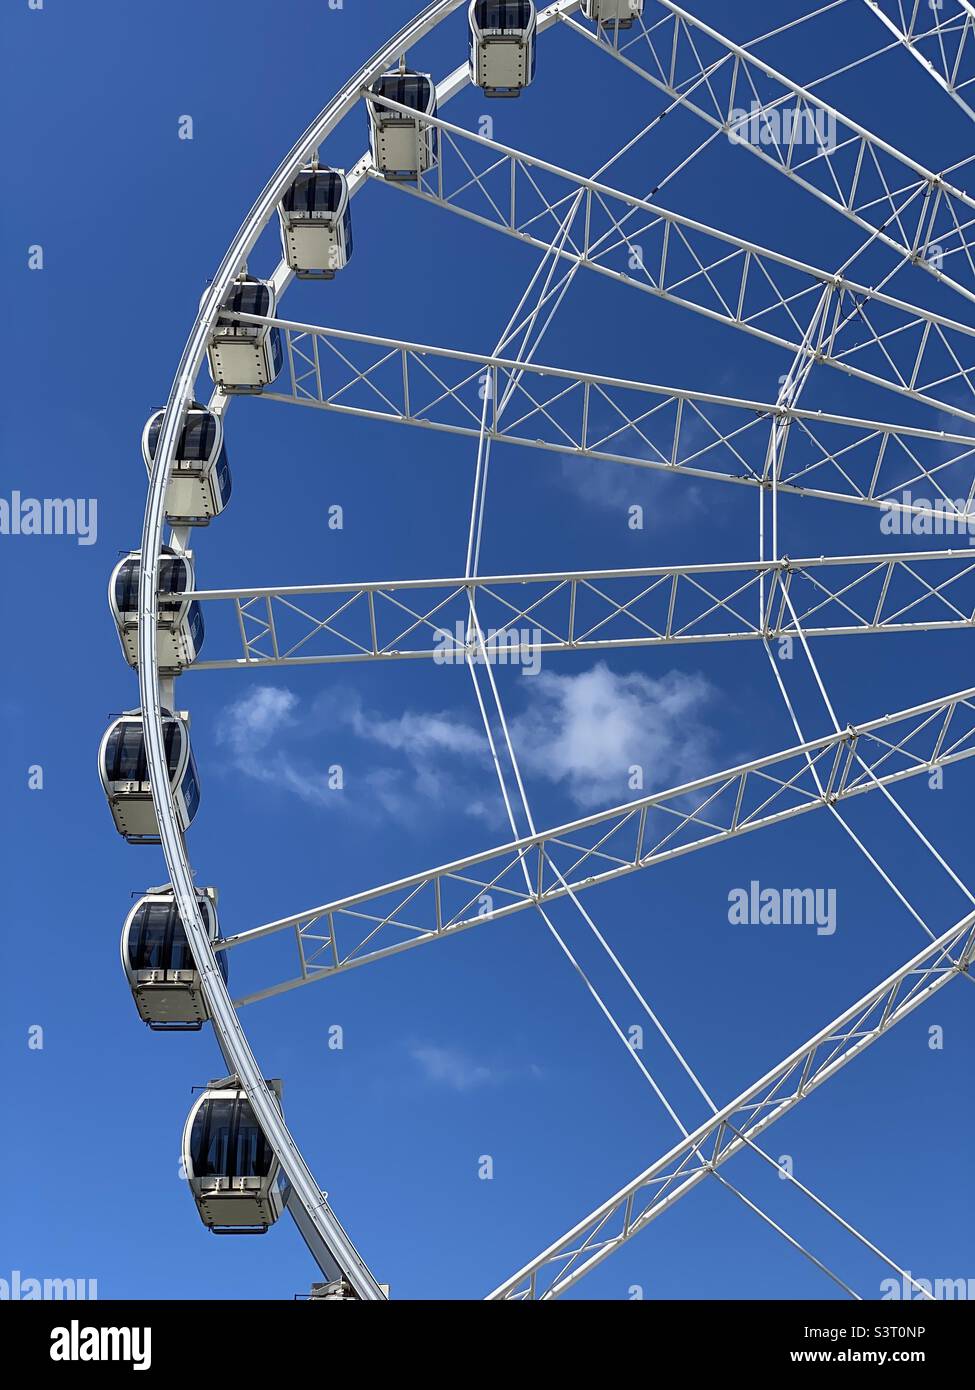 A sunny day at “The Wheel of Liverpool.” A famous tourist and visitor destination in Liverpool in the north of England. Photo ©️ COLIN HOSKINS. Stock Photo